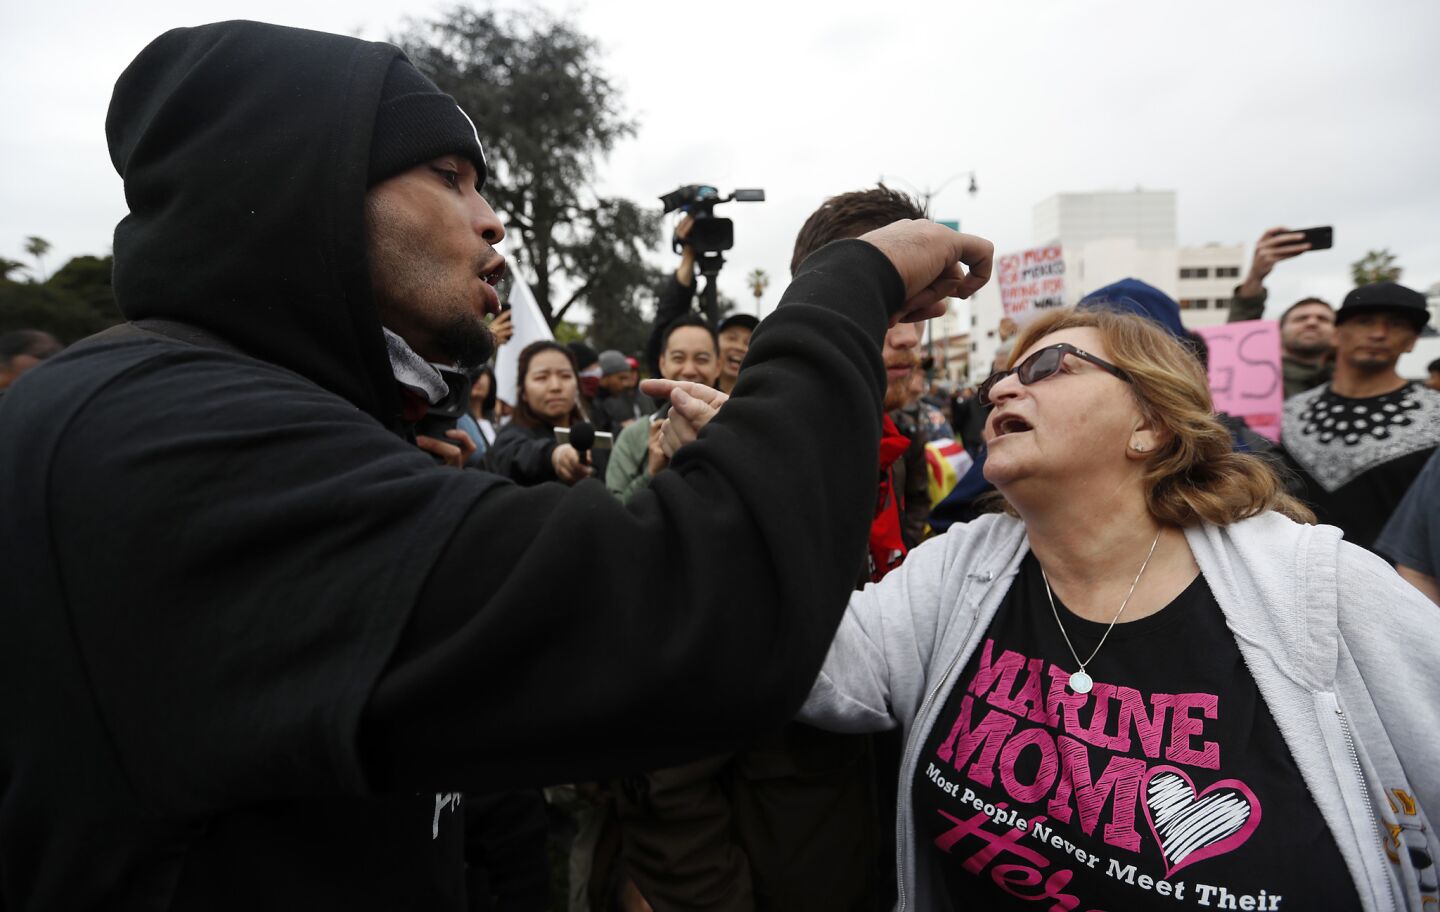 Pro and anti-Trump denonstrators get into a verbal confrontation at Beverly Gardens Park in Beverly Hills on Tuesday, Mar. 13, 2018.